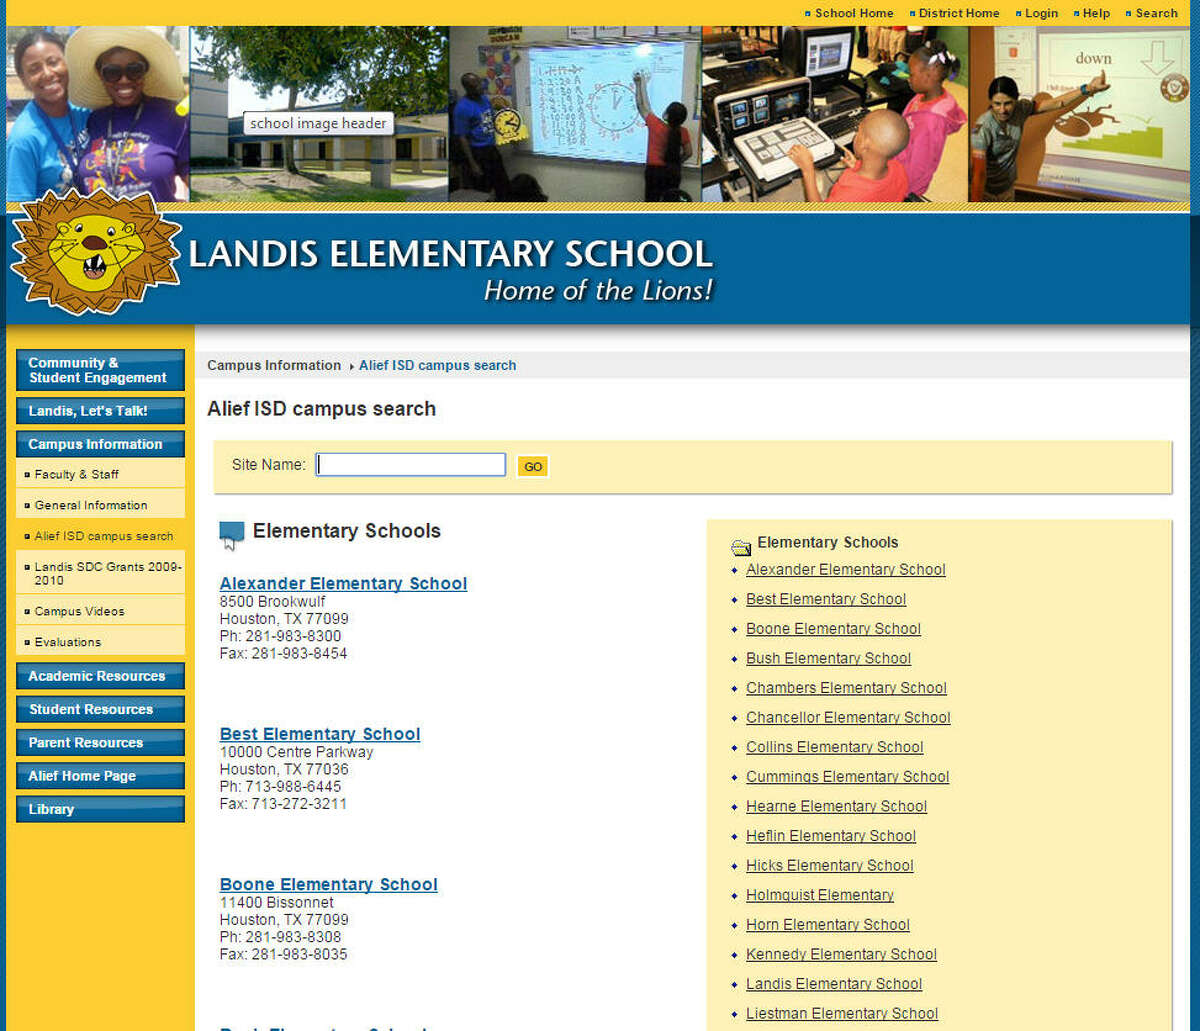 Landis Elementary Alief ISD Campus rated improvement required in 2015.